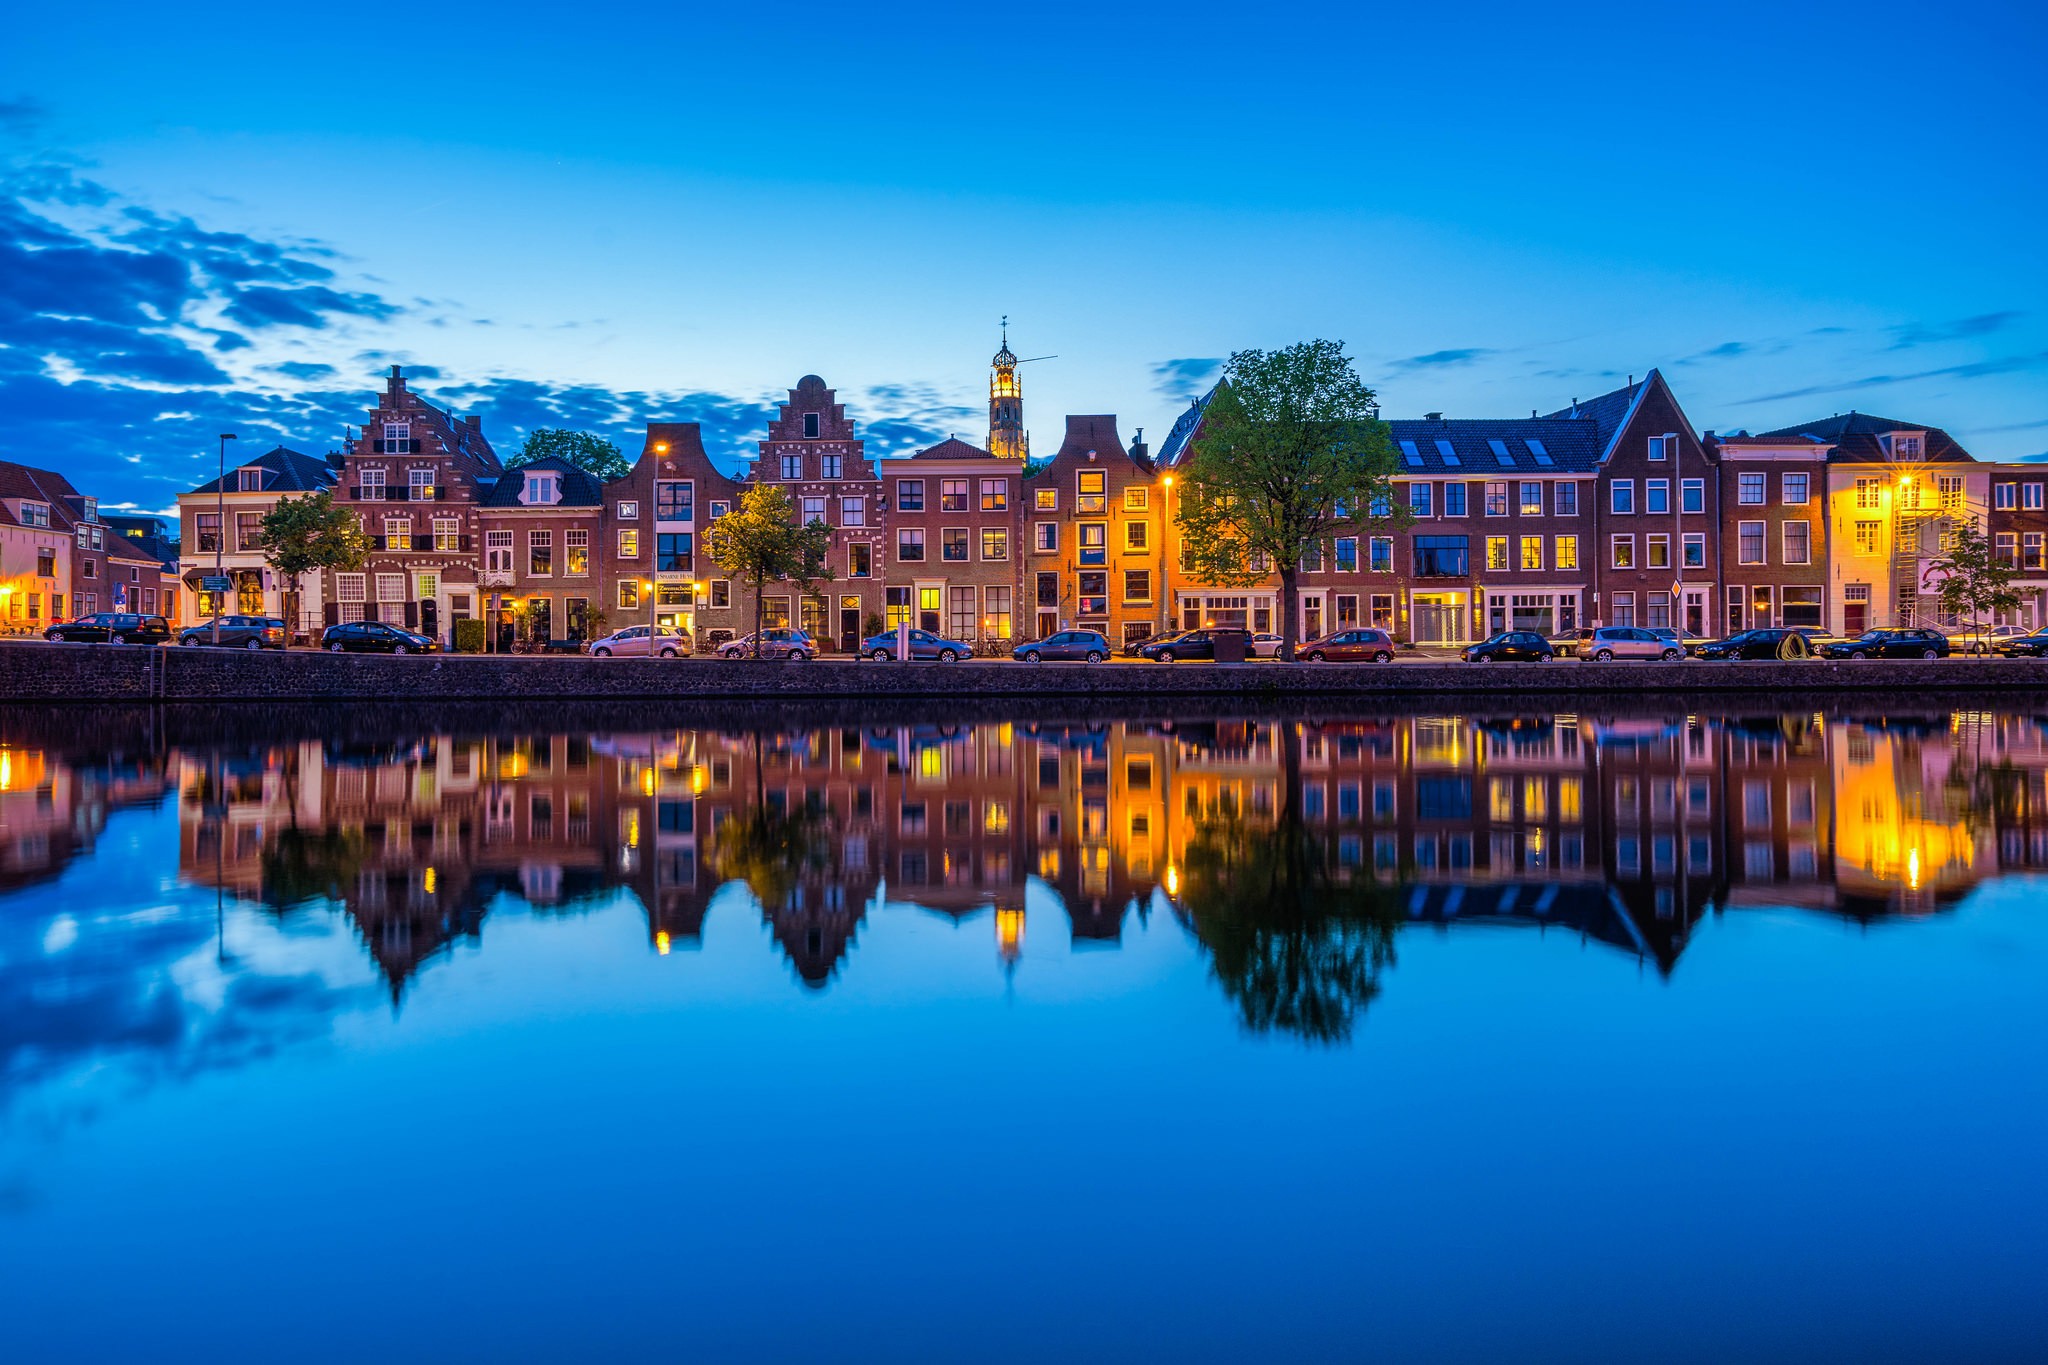 City Netherlands Calm Reflection River Water Old Building Sky Evening Blue Calm Waters Cyan 2048x1365